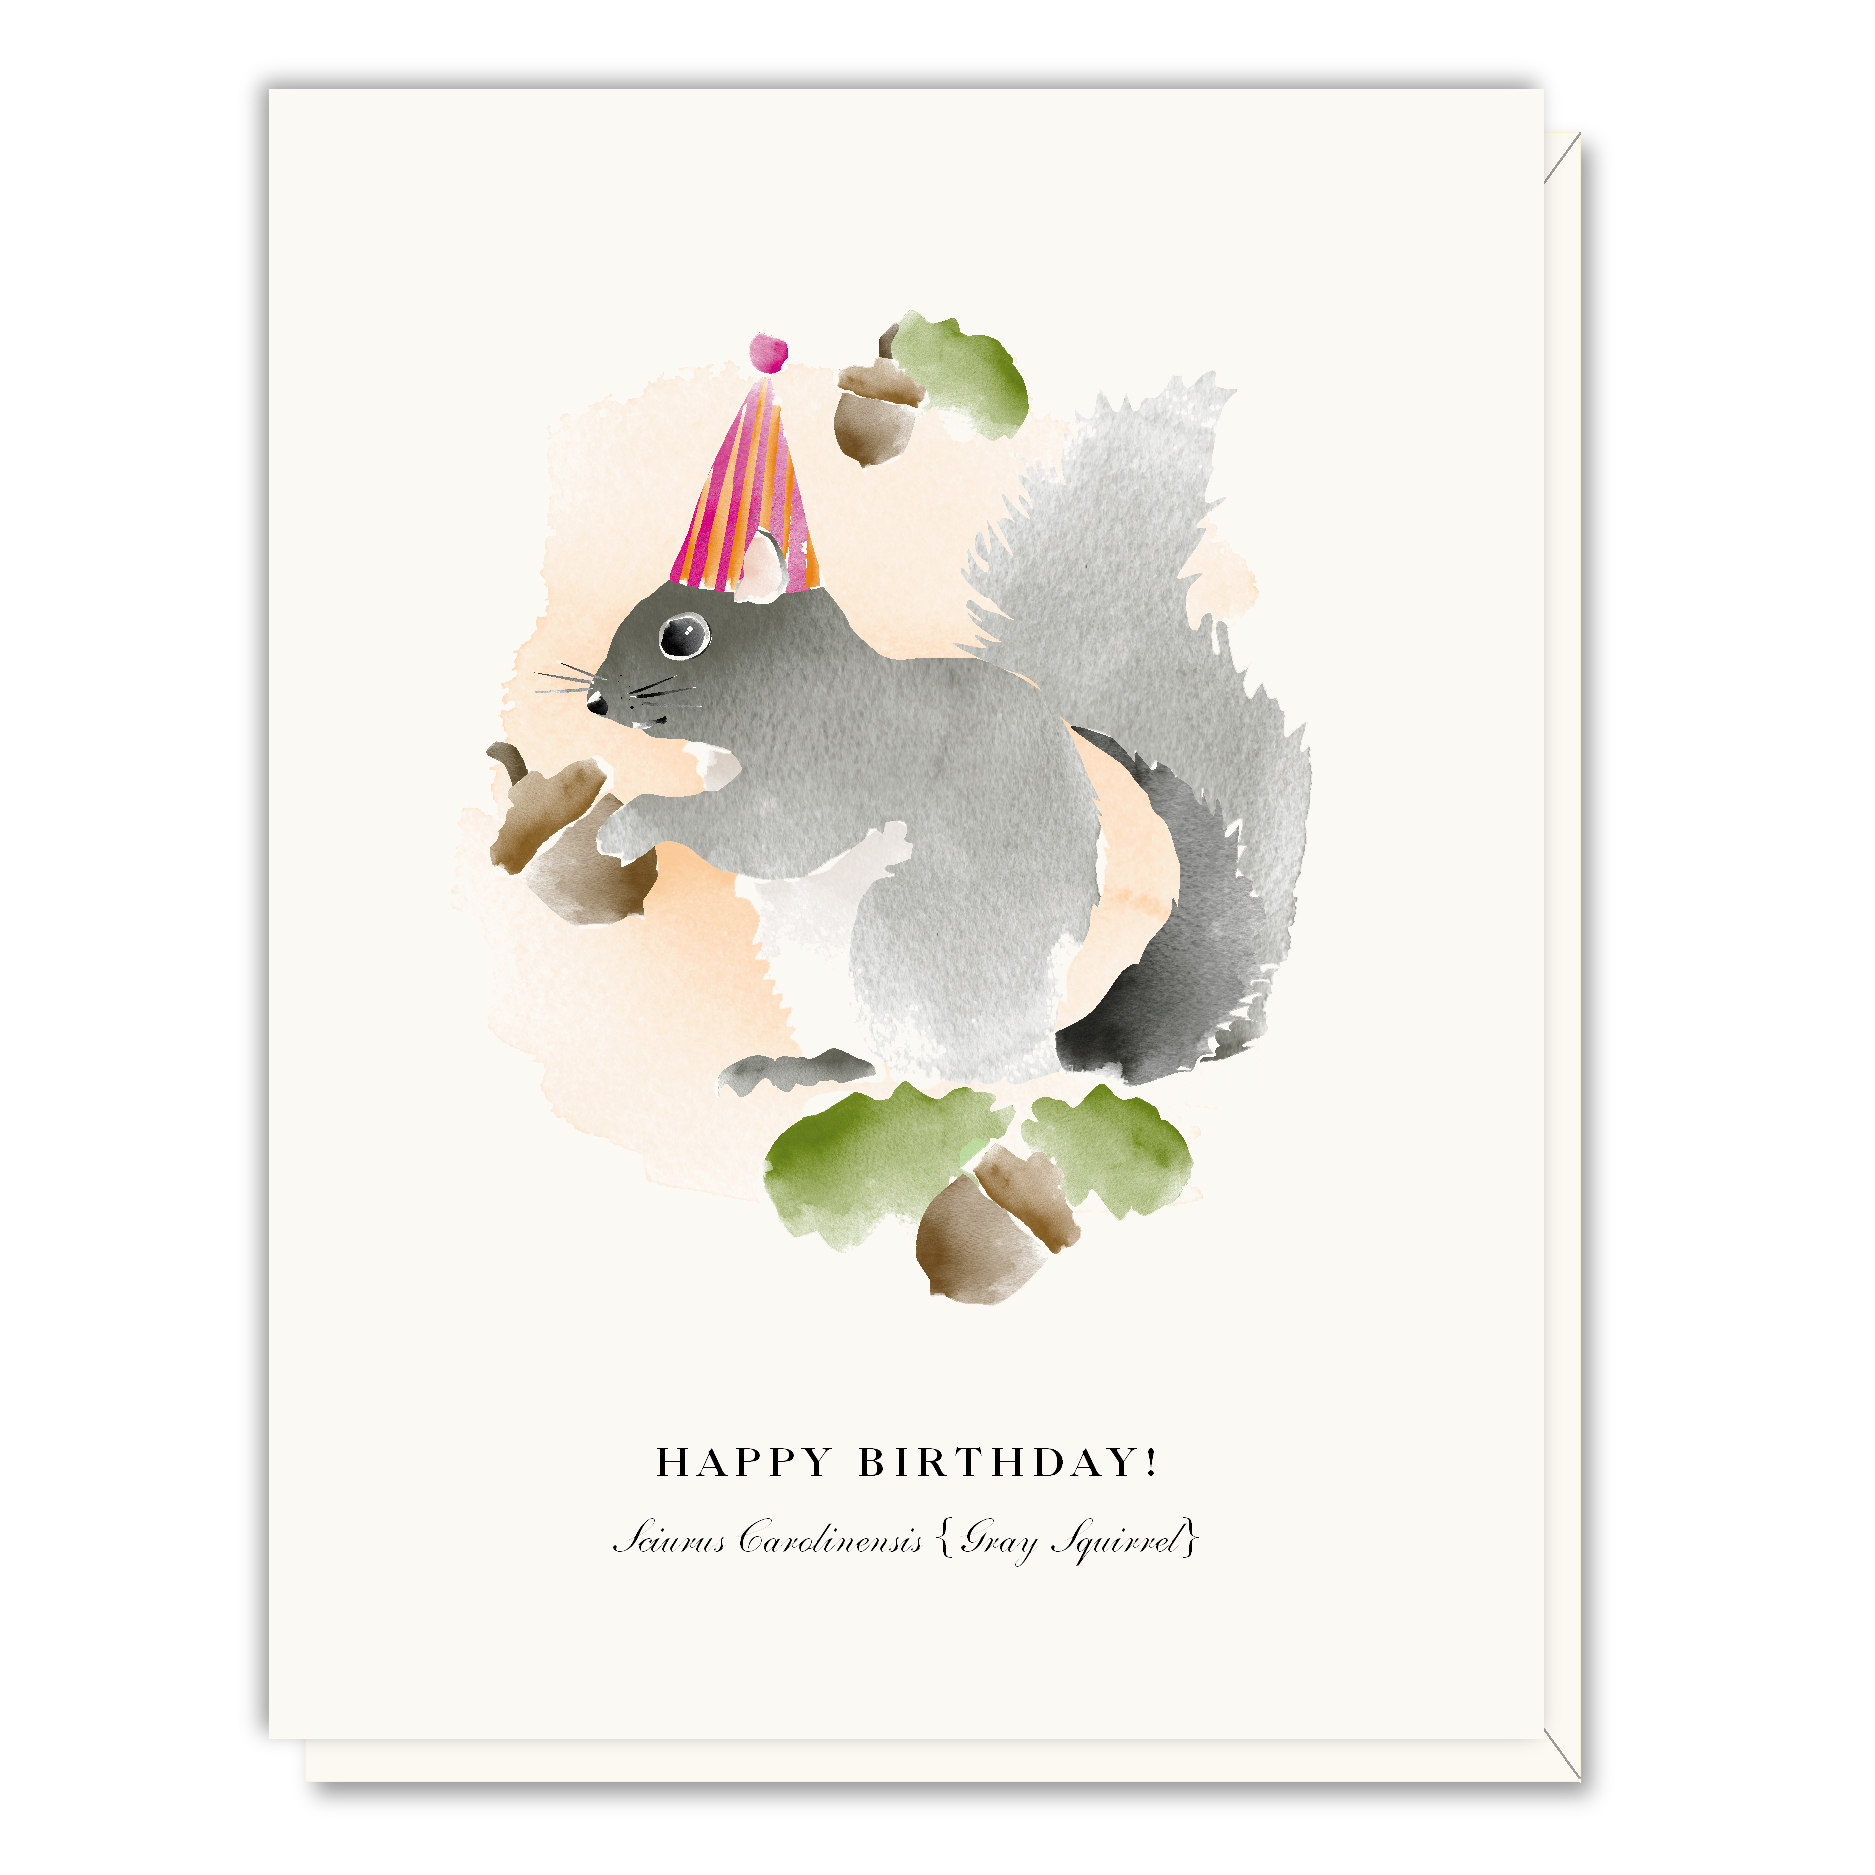 Birthday Card Blank Inside Relax Squirrel on Tree Branch Enjoy Chill Out 